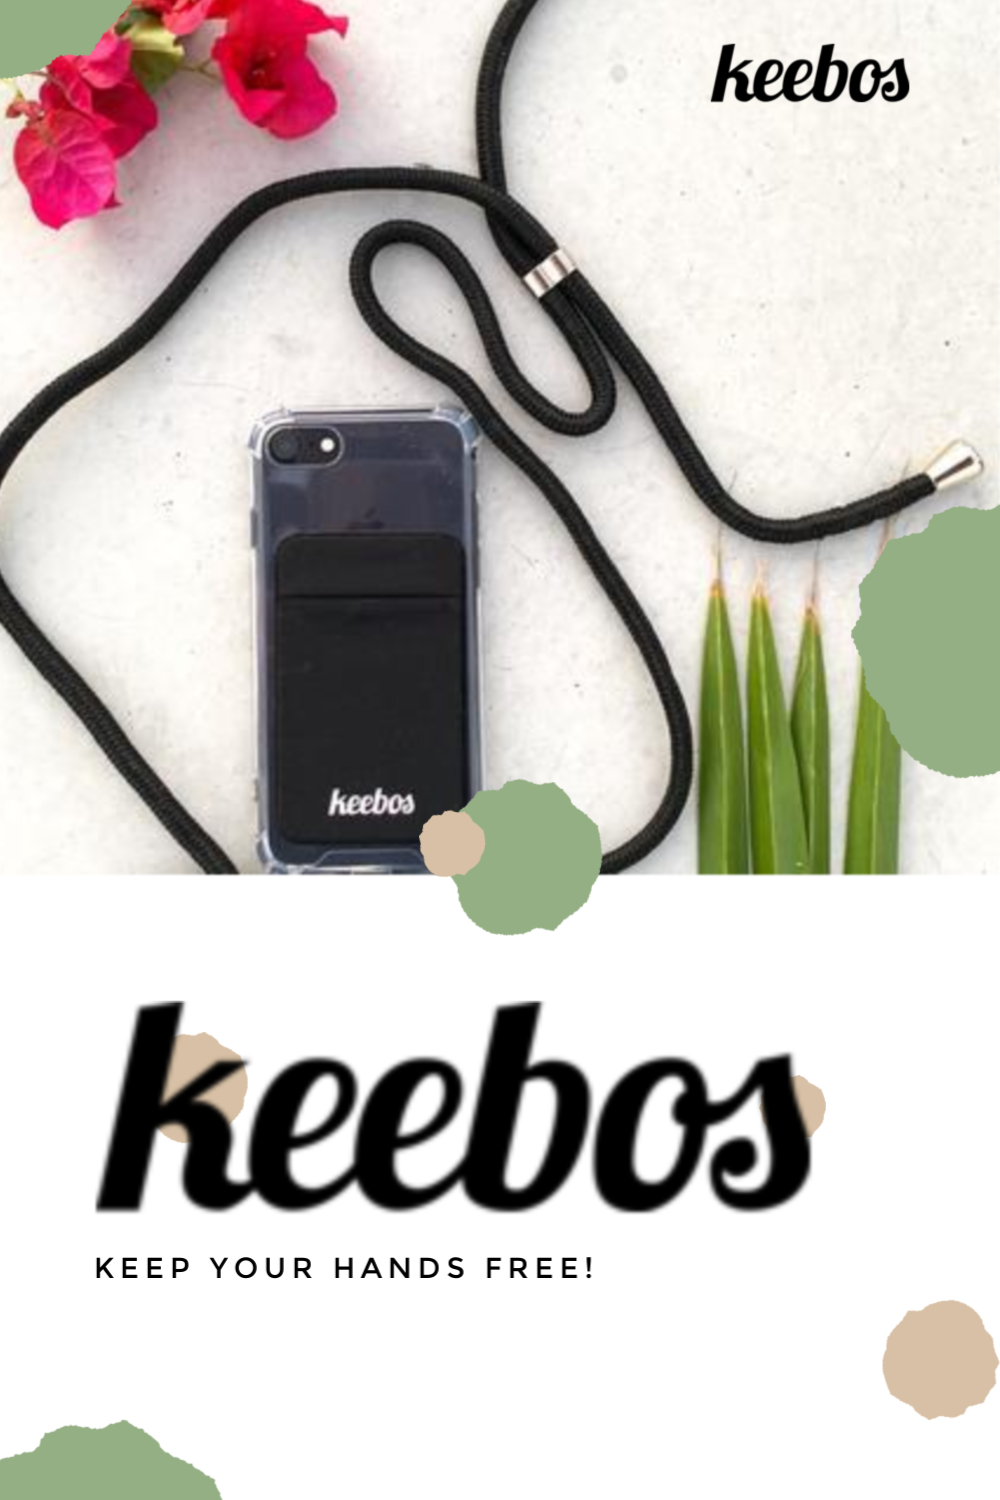 Never drop or lose your phone again - Keep your hands free #Keebos 